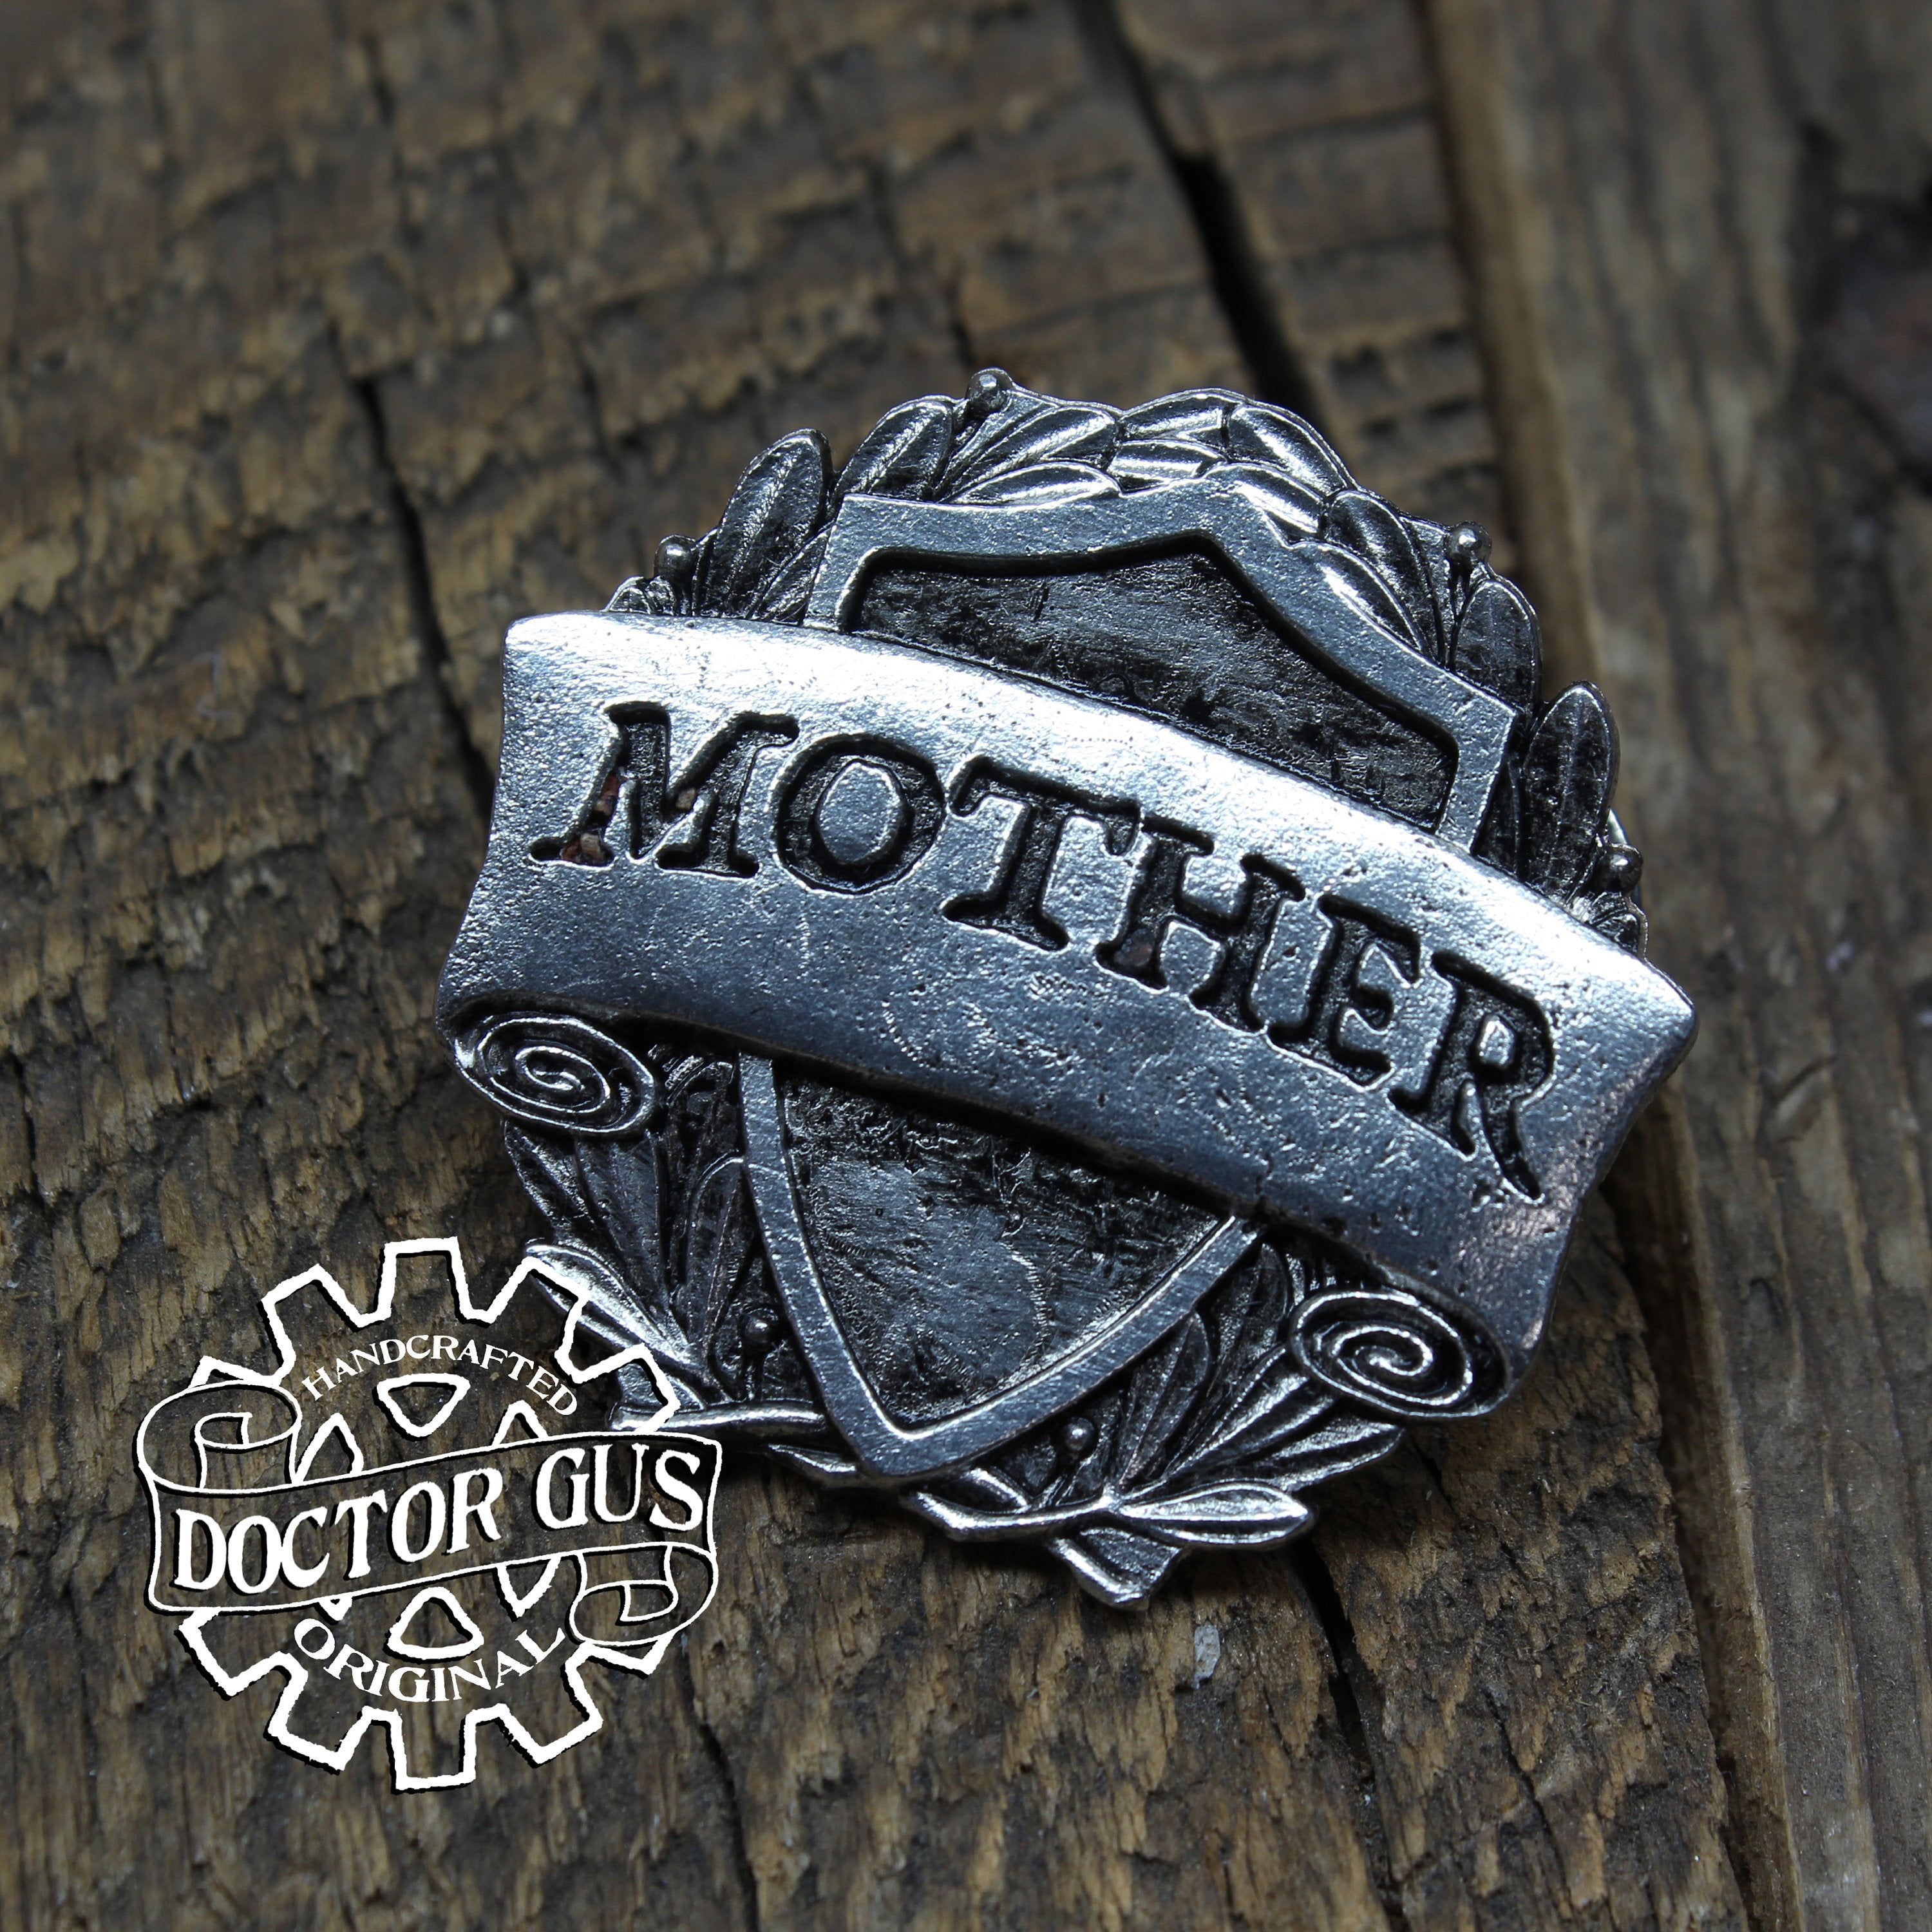 Mother Badge